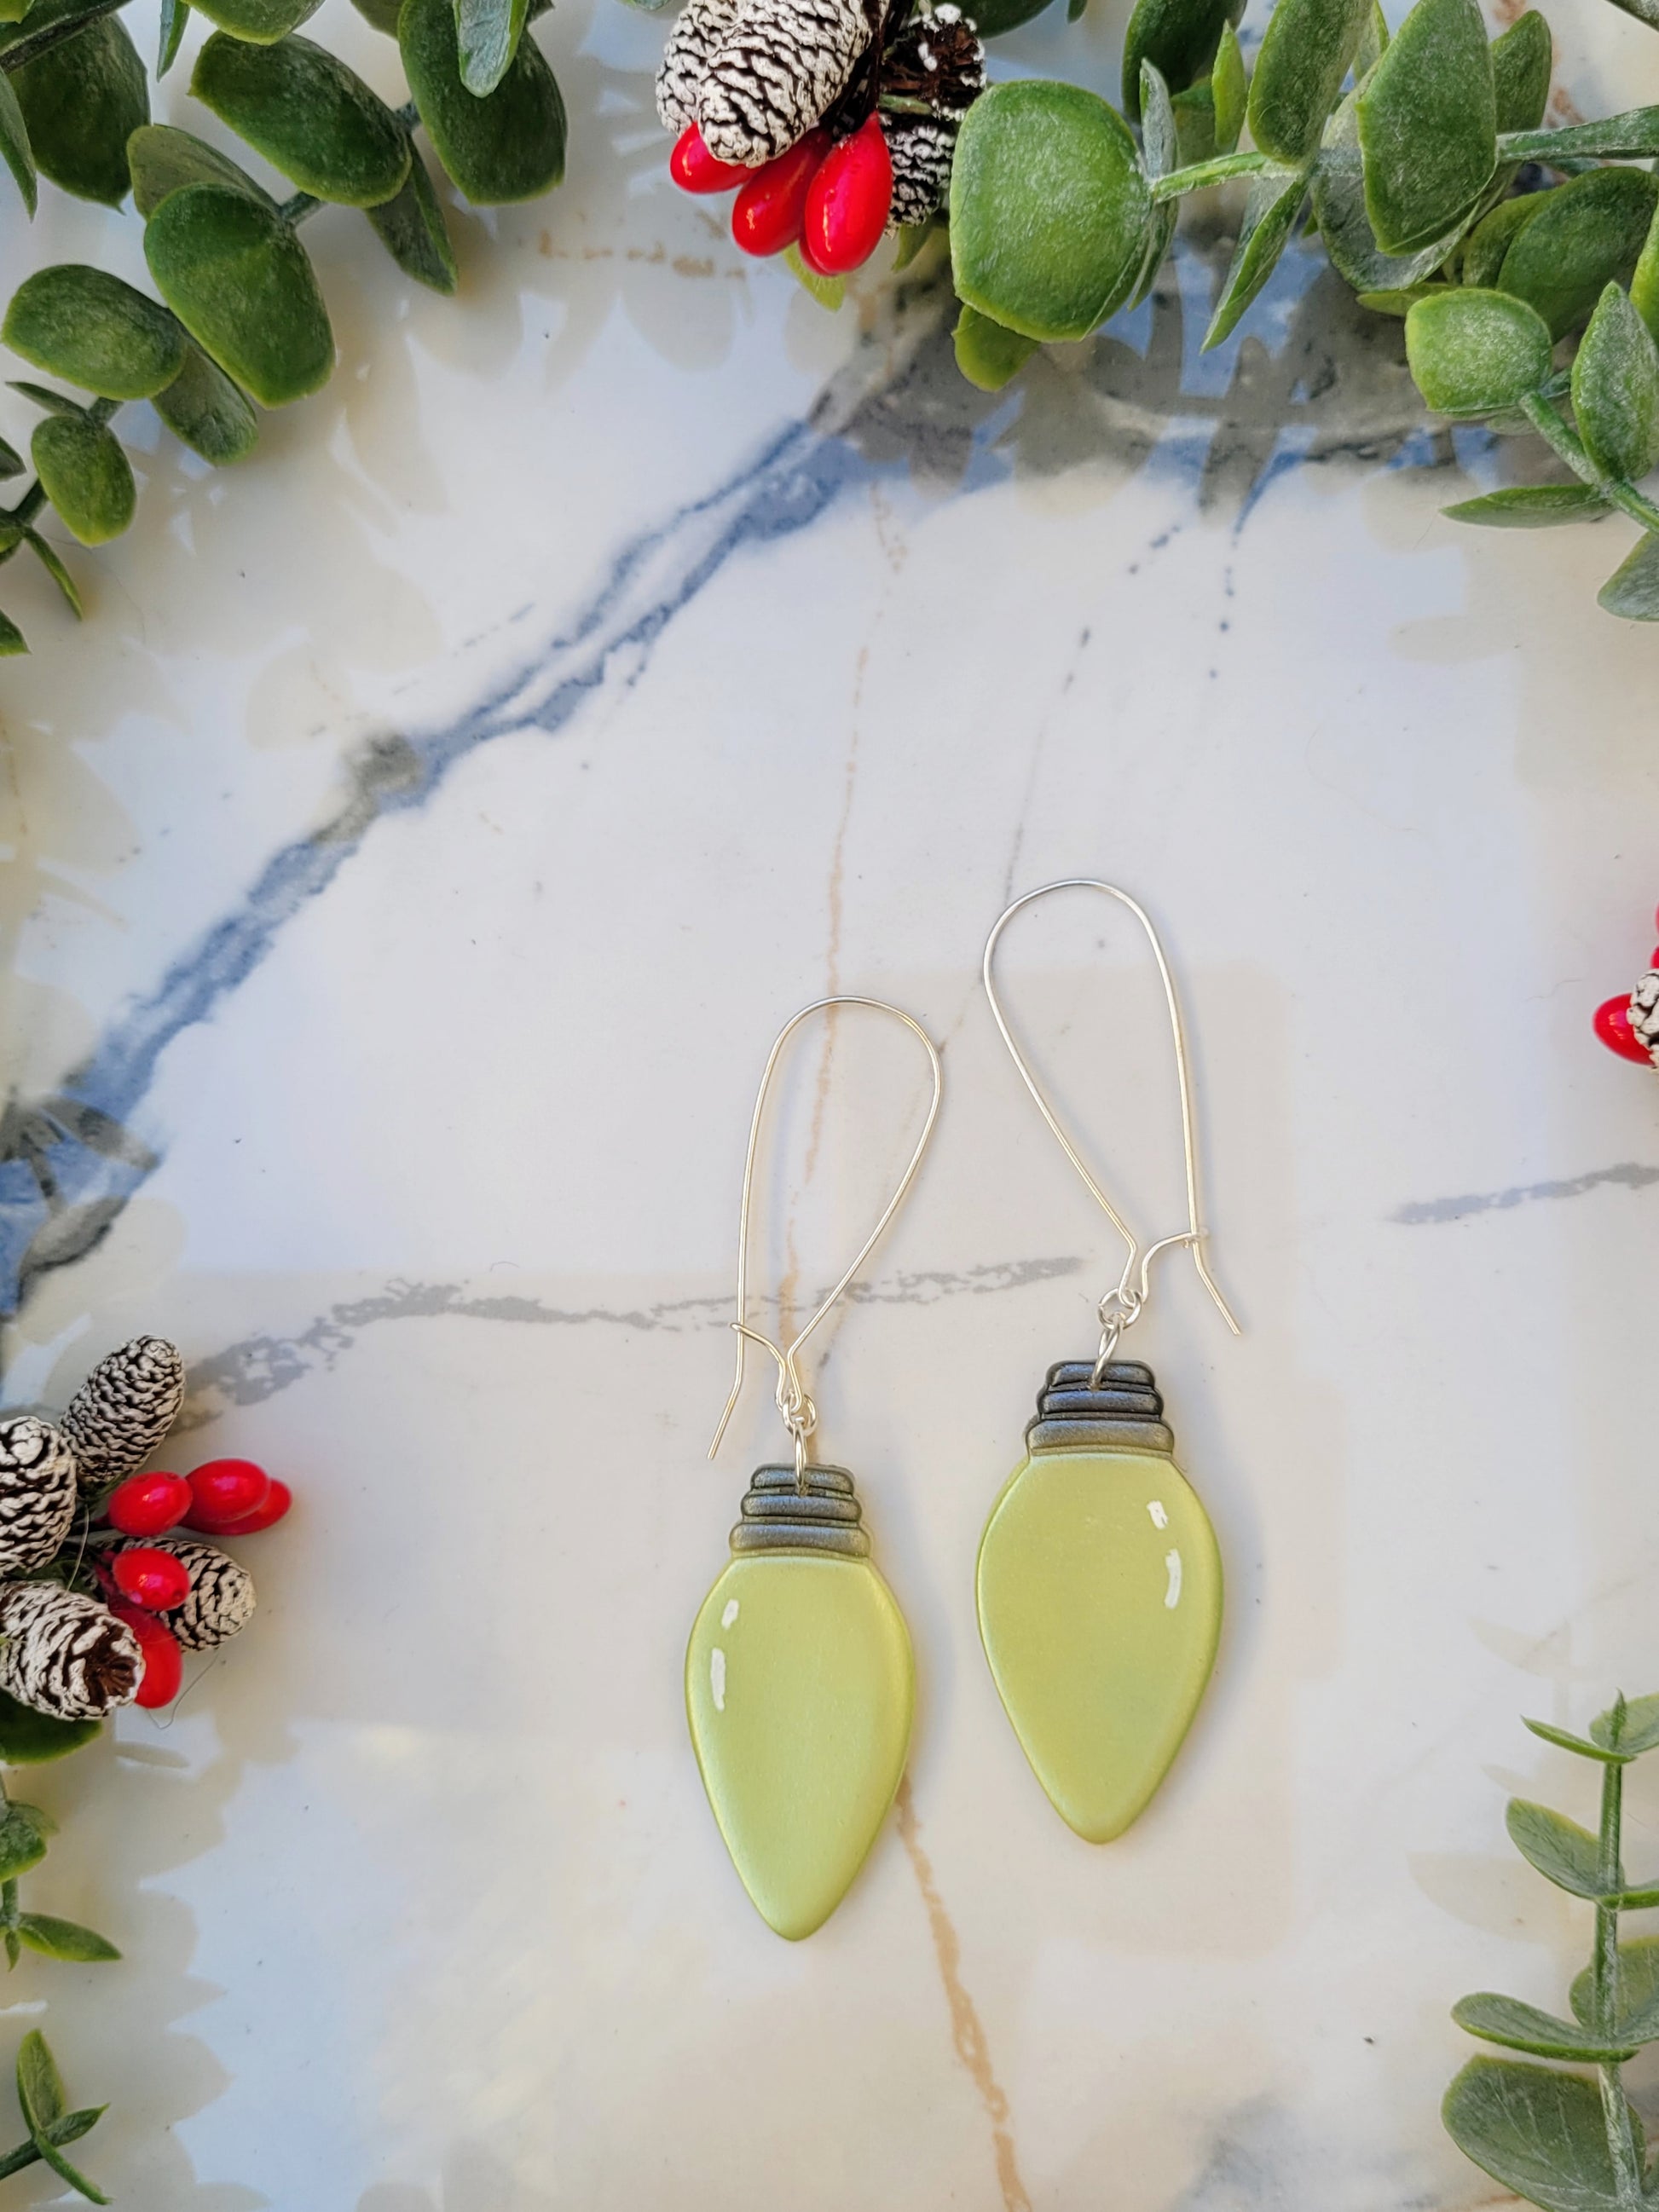 close up of green christmas lightbulb earrings on a marble background surrounded by foliage.